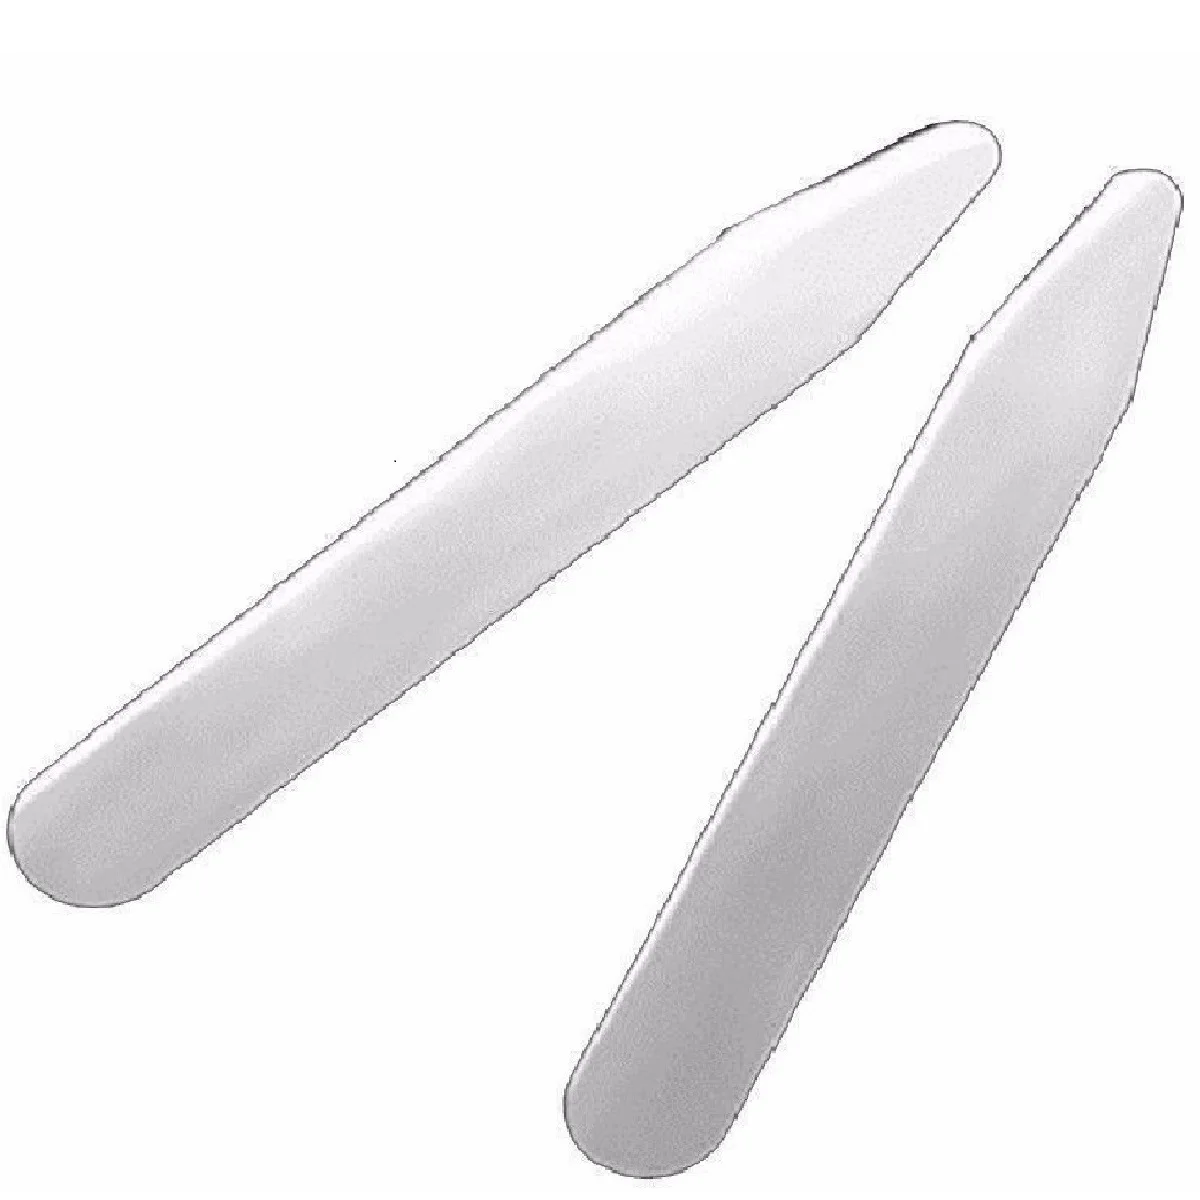 MODERN GOODS SHOP Stainless Steel Collar Stays With Laser Engraved Heart In Hand Design 2.5 Inch Metal Collar Stiffeners Made In USA